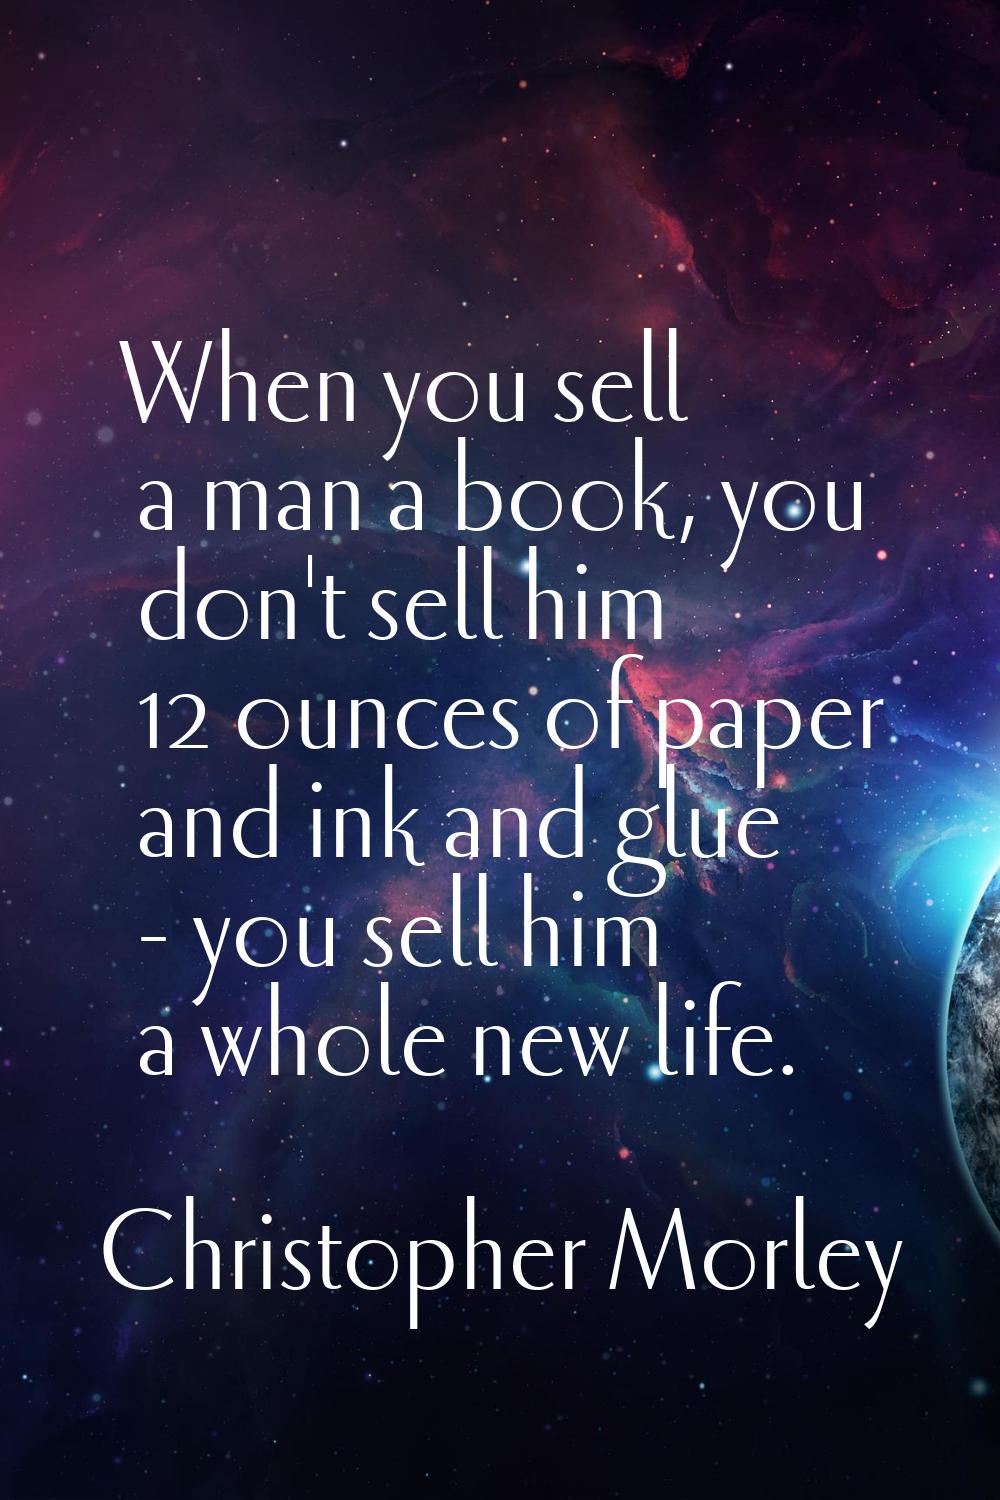 When you sell a man a book, you don't sell him 12 ounces of paper and ink and glue - you sell him a